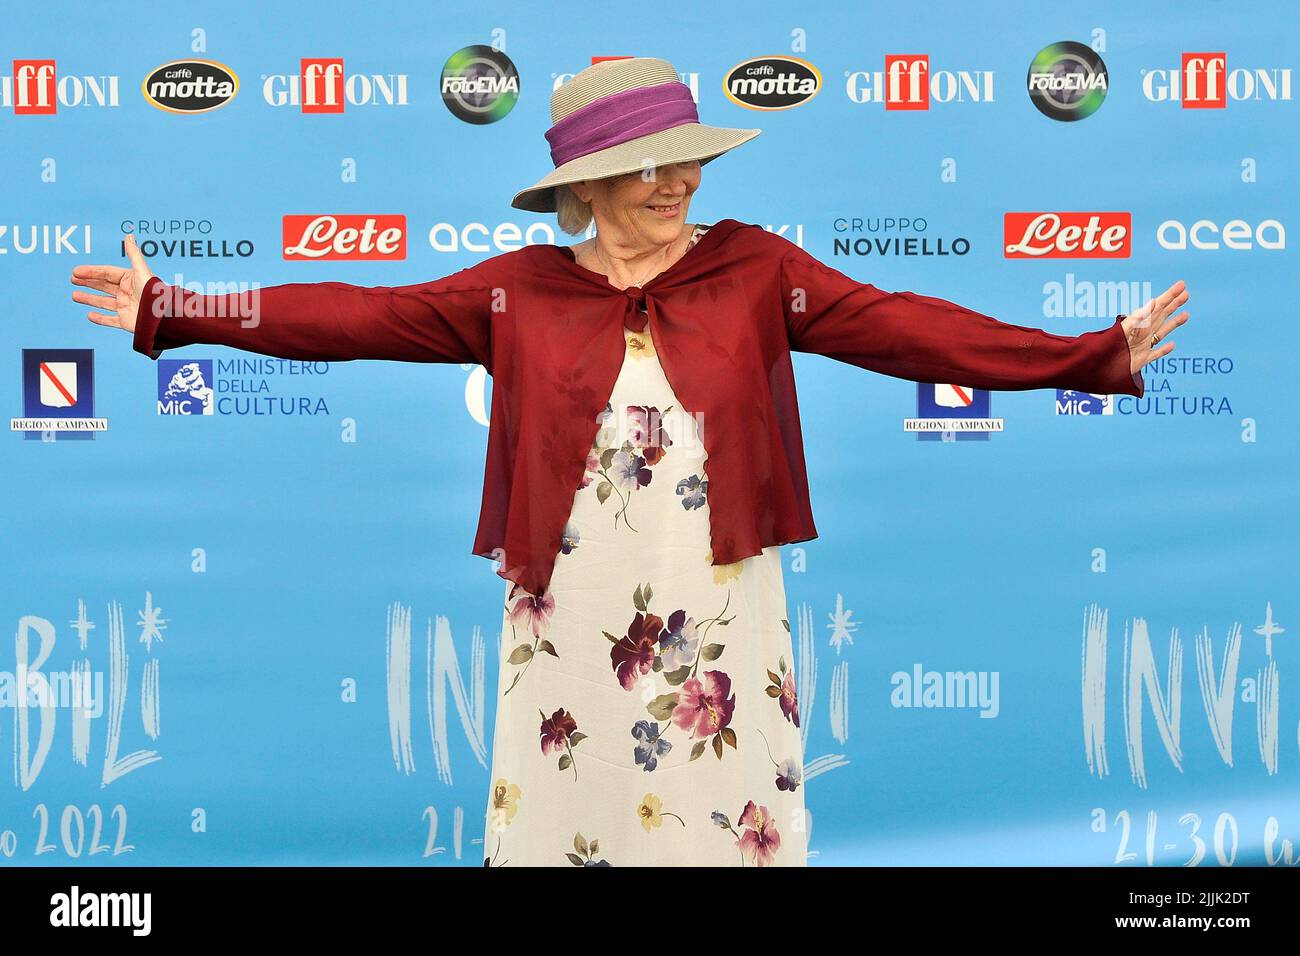 Caterina Caselli Italian singer,during the Giffoni Film Festival held from 21 to 30 July 2022, in the city of Giffoni Valle Piana. Stock Photo